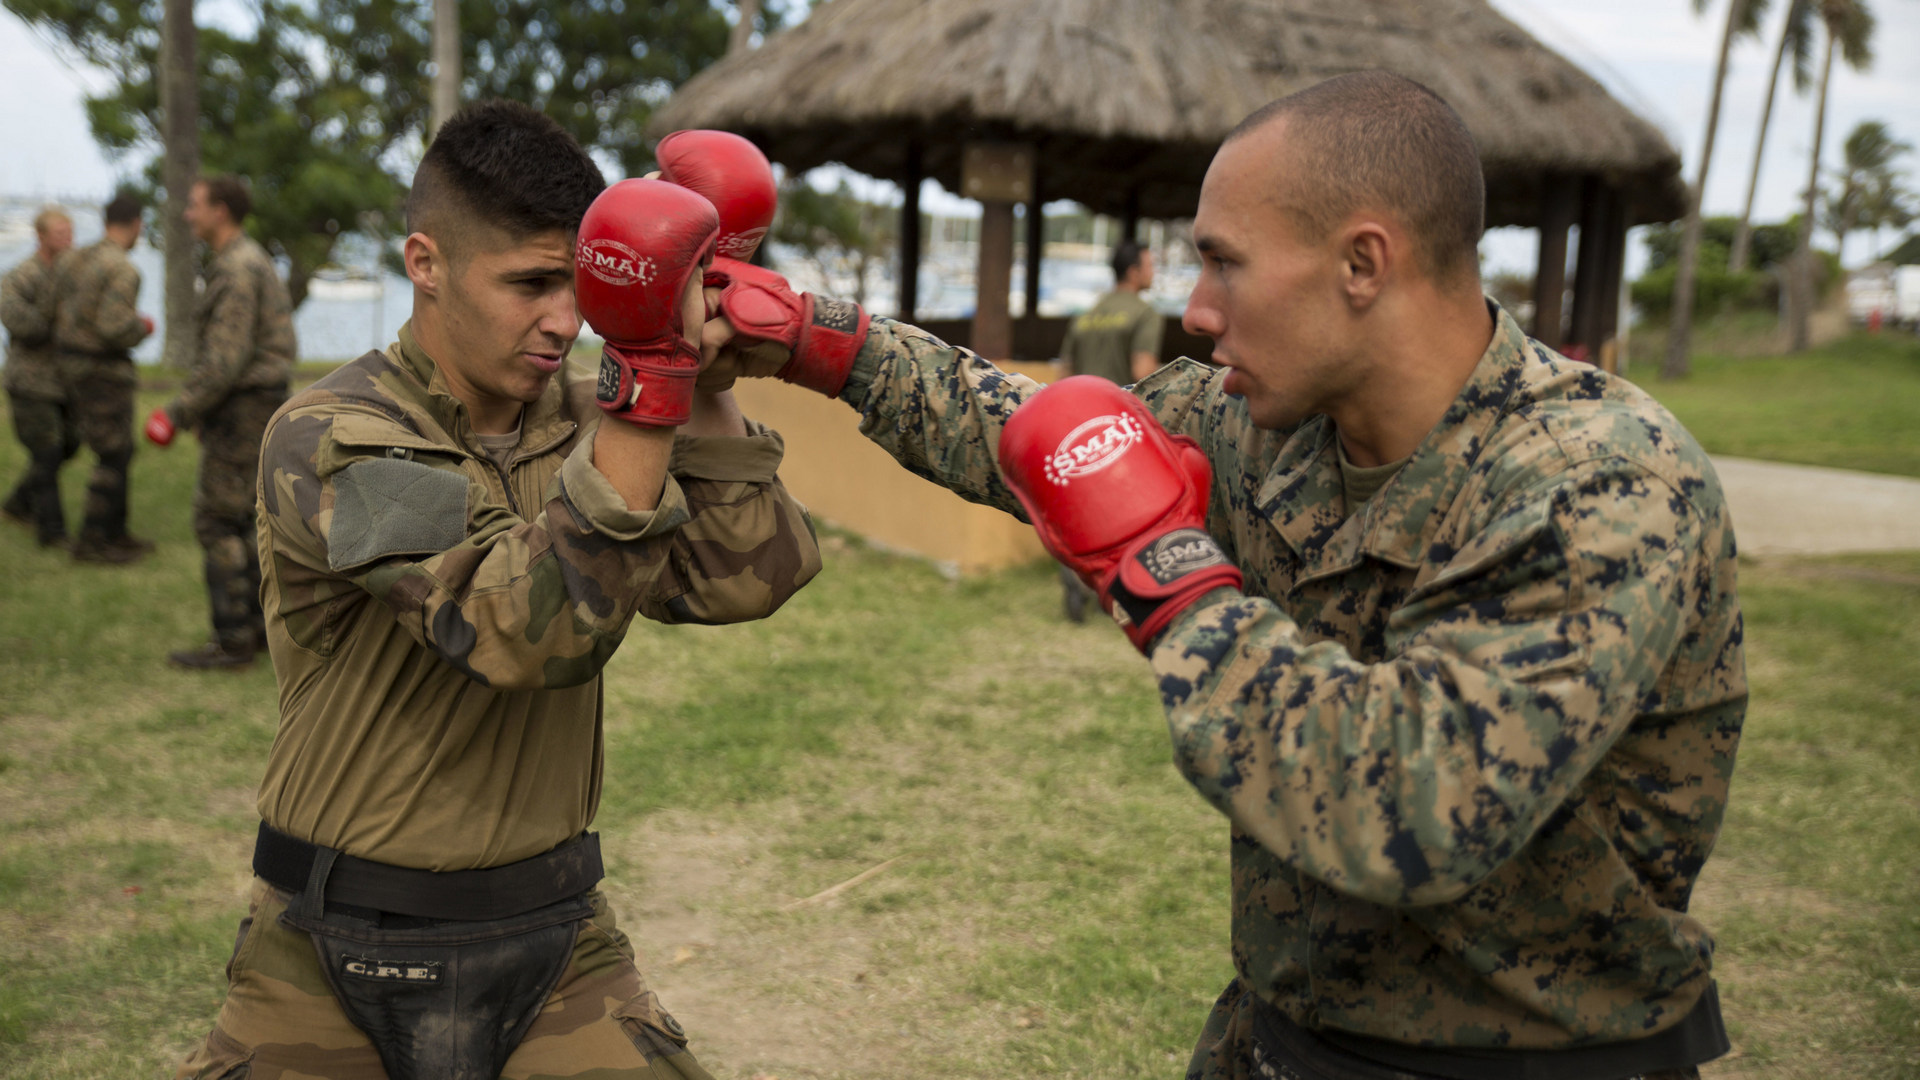 French Army Pfc. Quentin Antomarchi, left, an infantryman, and Cpl. Joseph J. Bennetti, a machine gunner, box during a French Armed Forces Nautical Commando Course at Quartier Gribeauval, New Caledonia – Photo USMC © Sgt. Carlos Cruz Jr. -